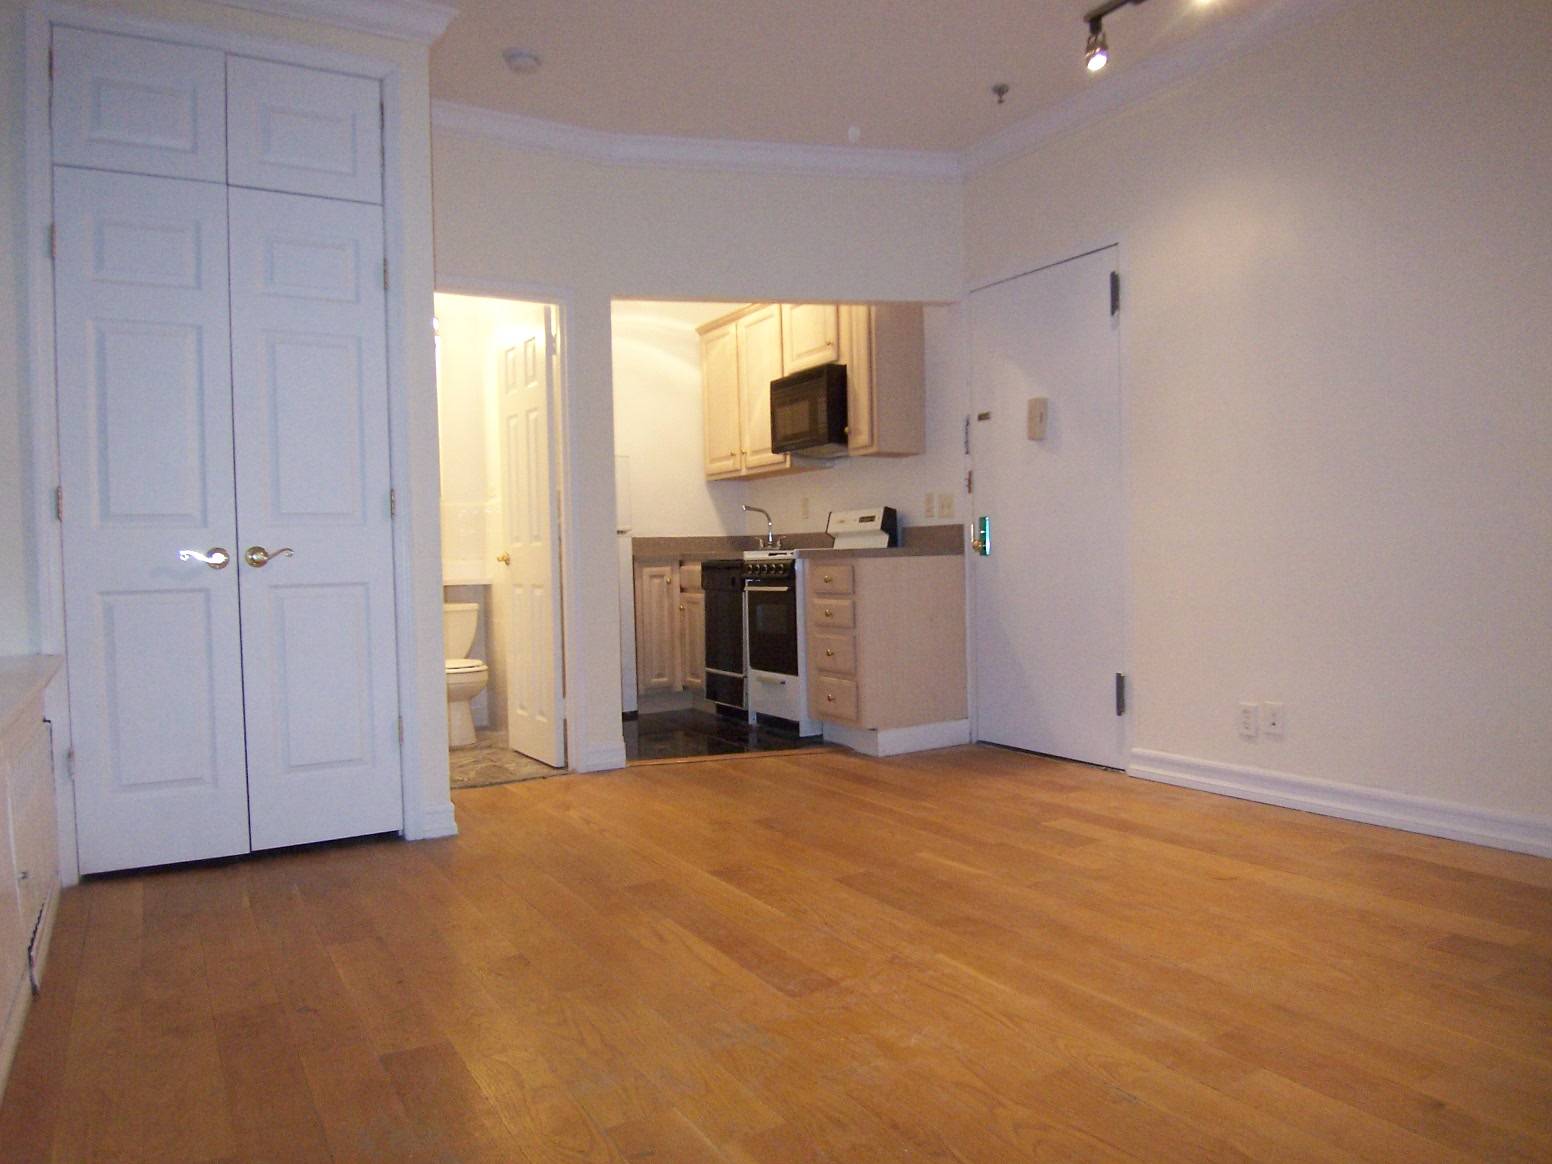 Charming Upper West Side Studio Apartment for Rent In a Elevator Building - One Block to Central Park